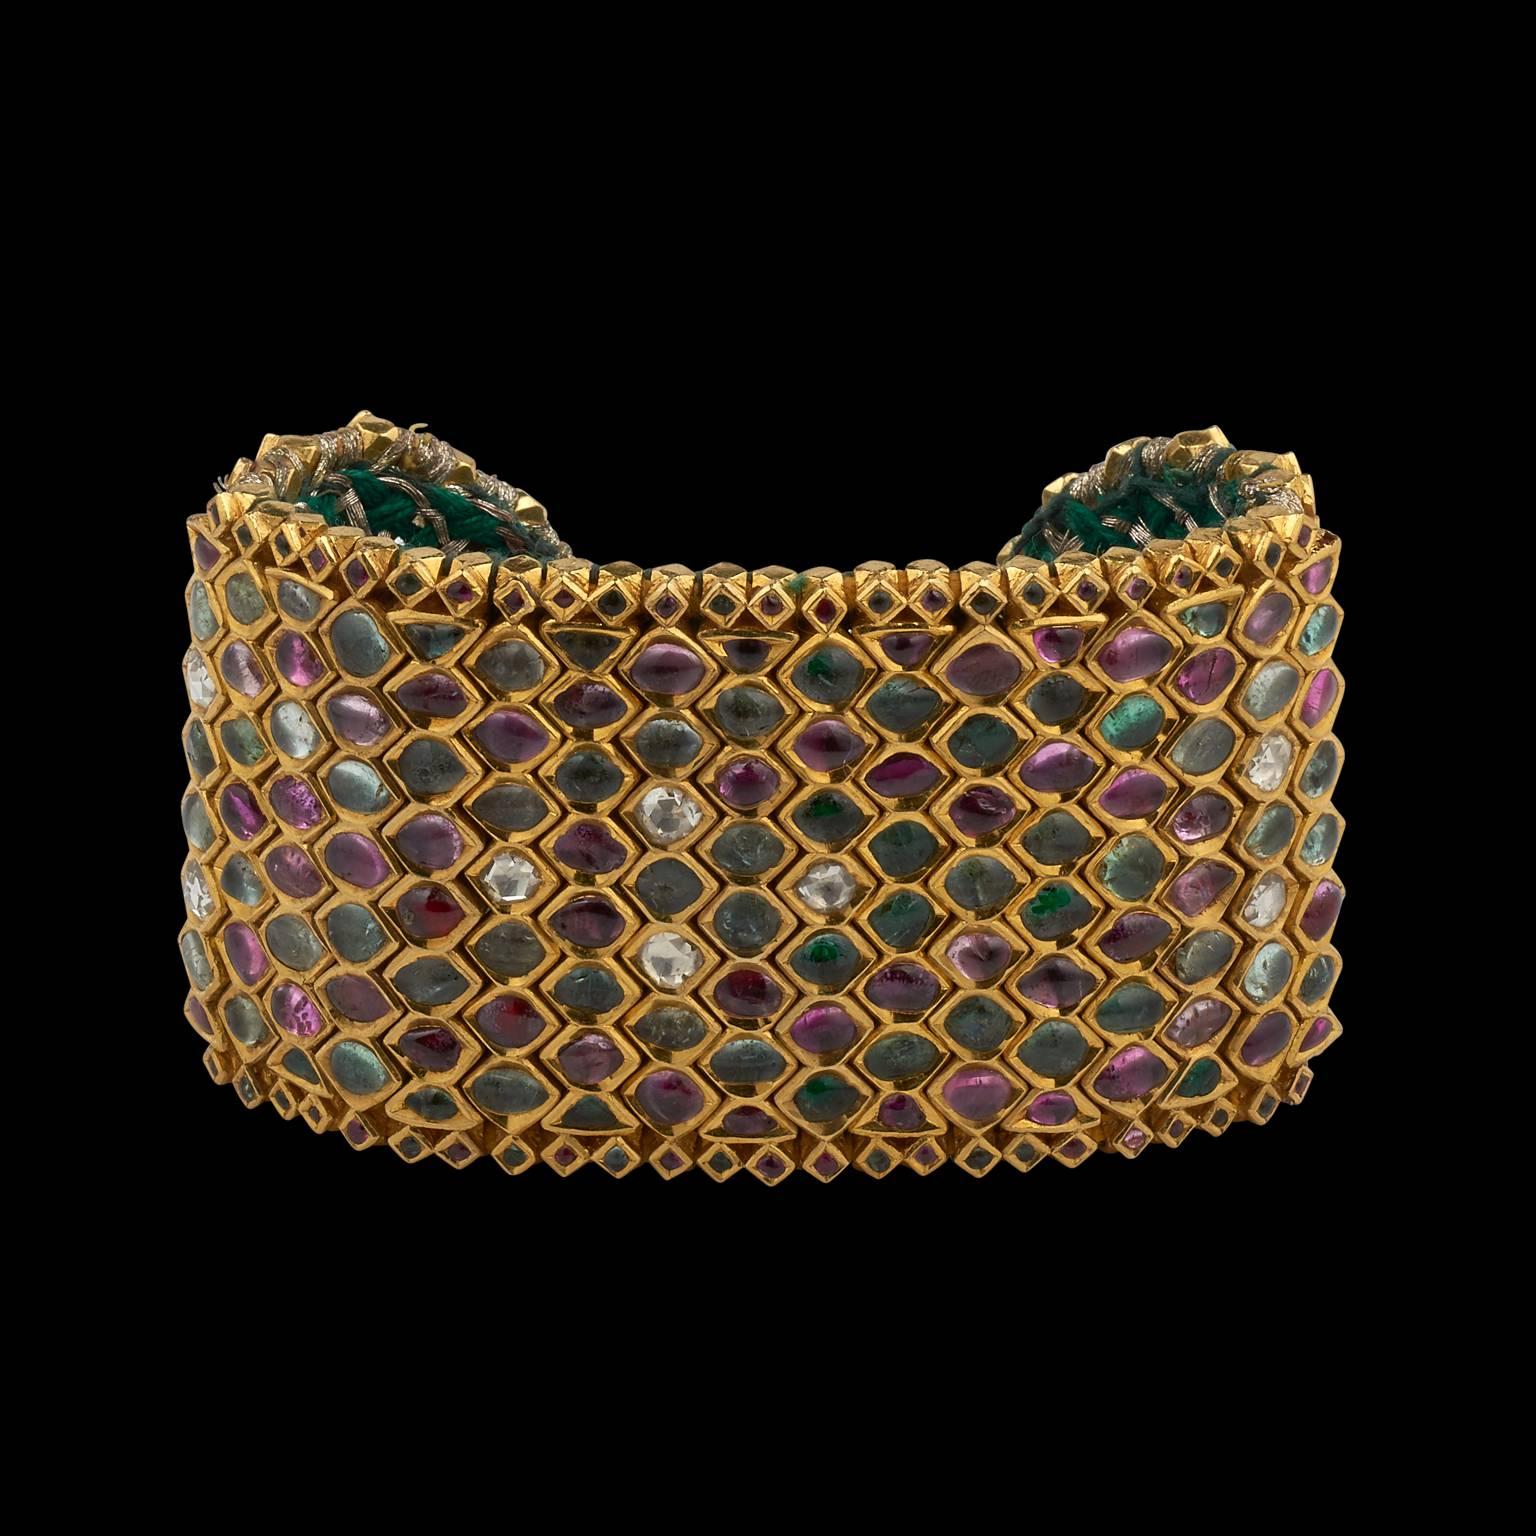 Armlet / Cuff
Mughal or Deccan, India
18th Century

Fabricated from pure gold, flexible with interlocking vertical units, each set with diamonds, rubies and emeralds. The semi-circular ends are set with similar precious gemstones forming bird